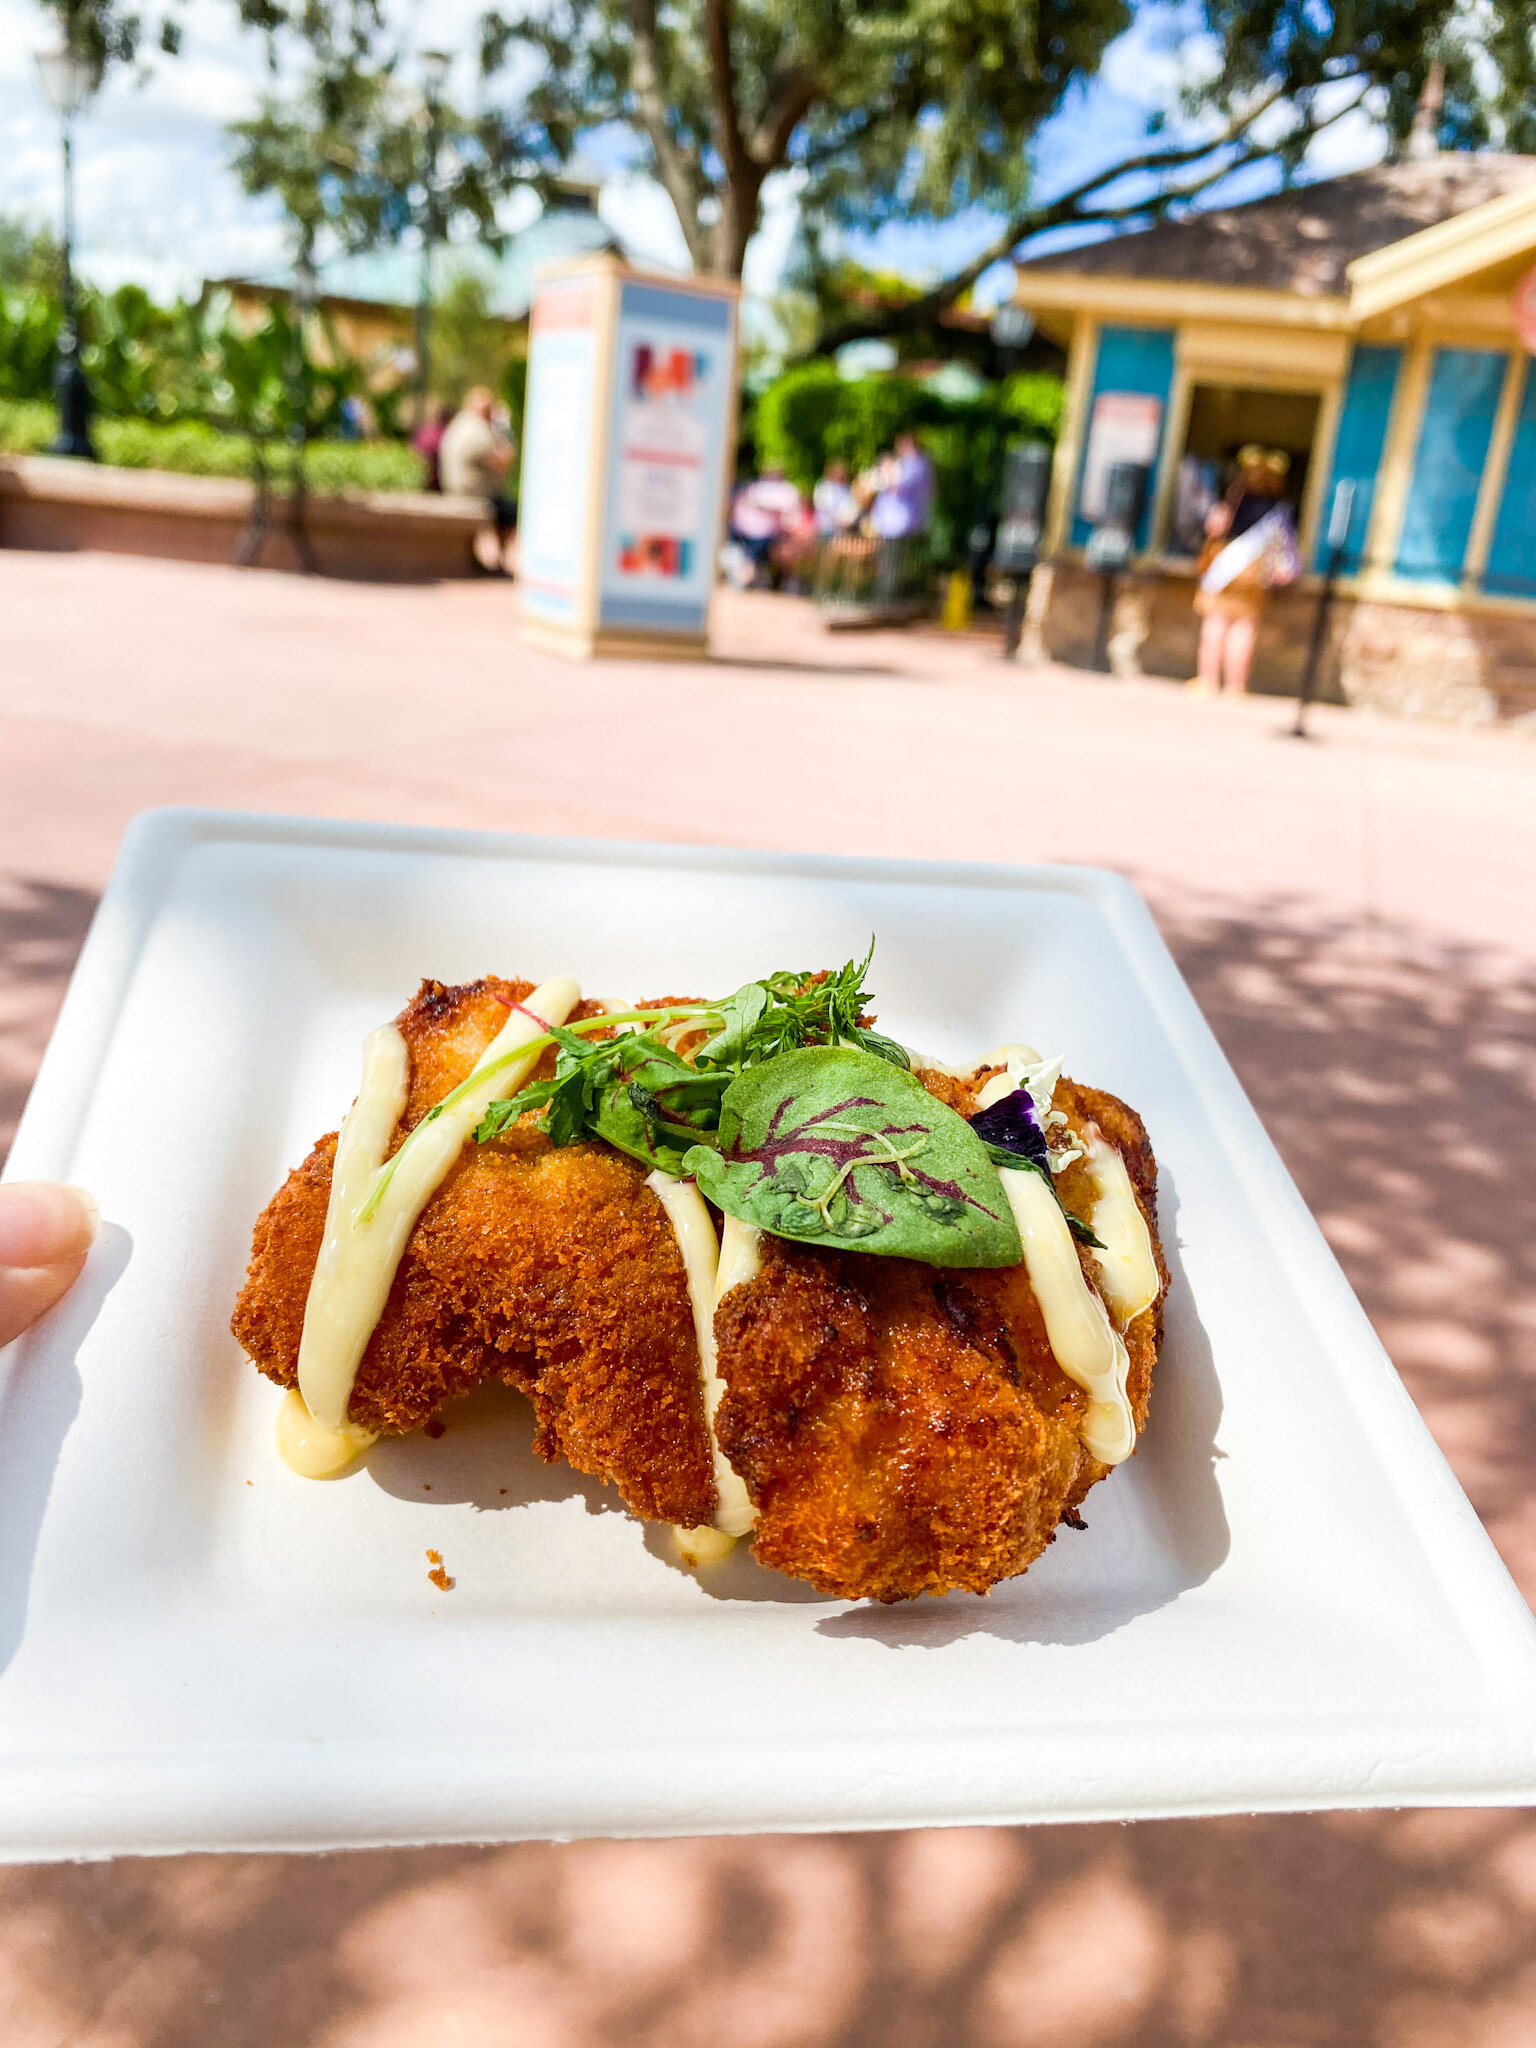 Taryn Into Travel | Epcot Food and Wine Festival 2020 Gluten-Free Epcot Food Allergies Disney World